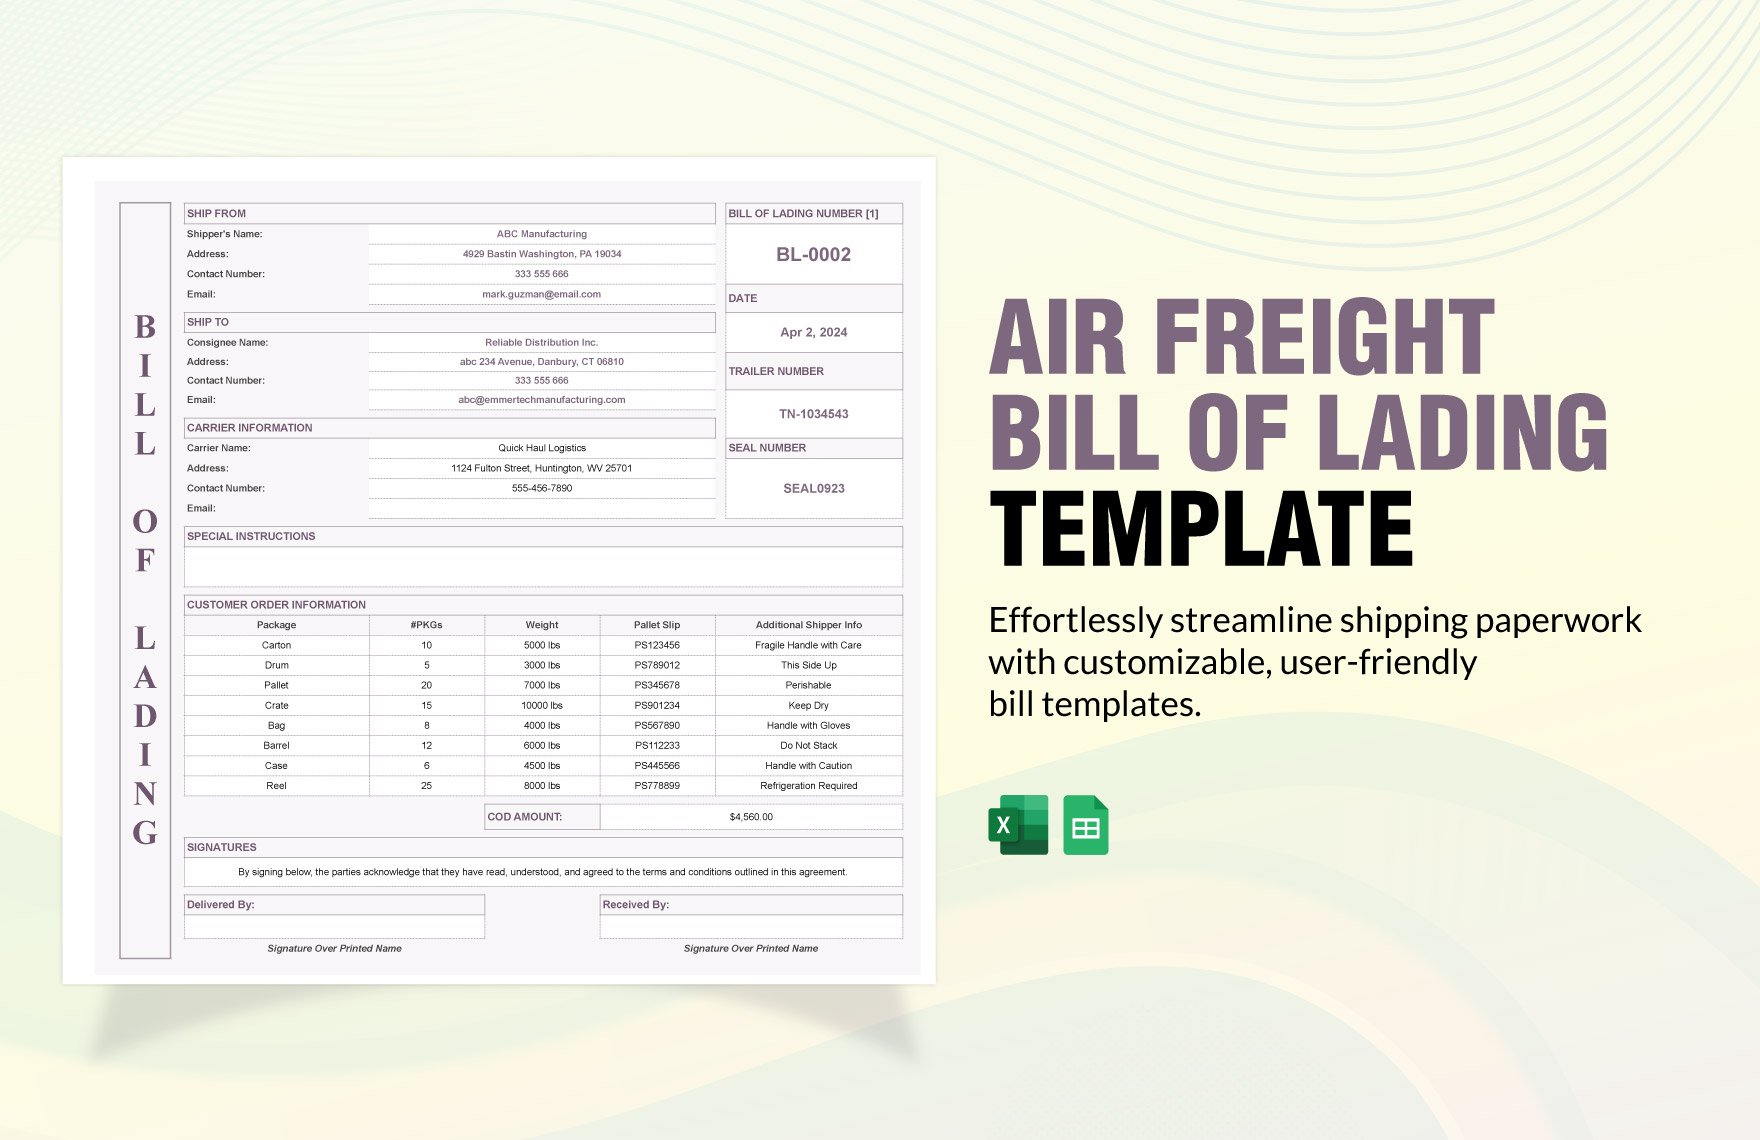 Air Freight Bill of Lading Template in Excel, Google Sheets